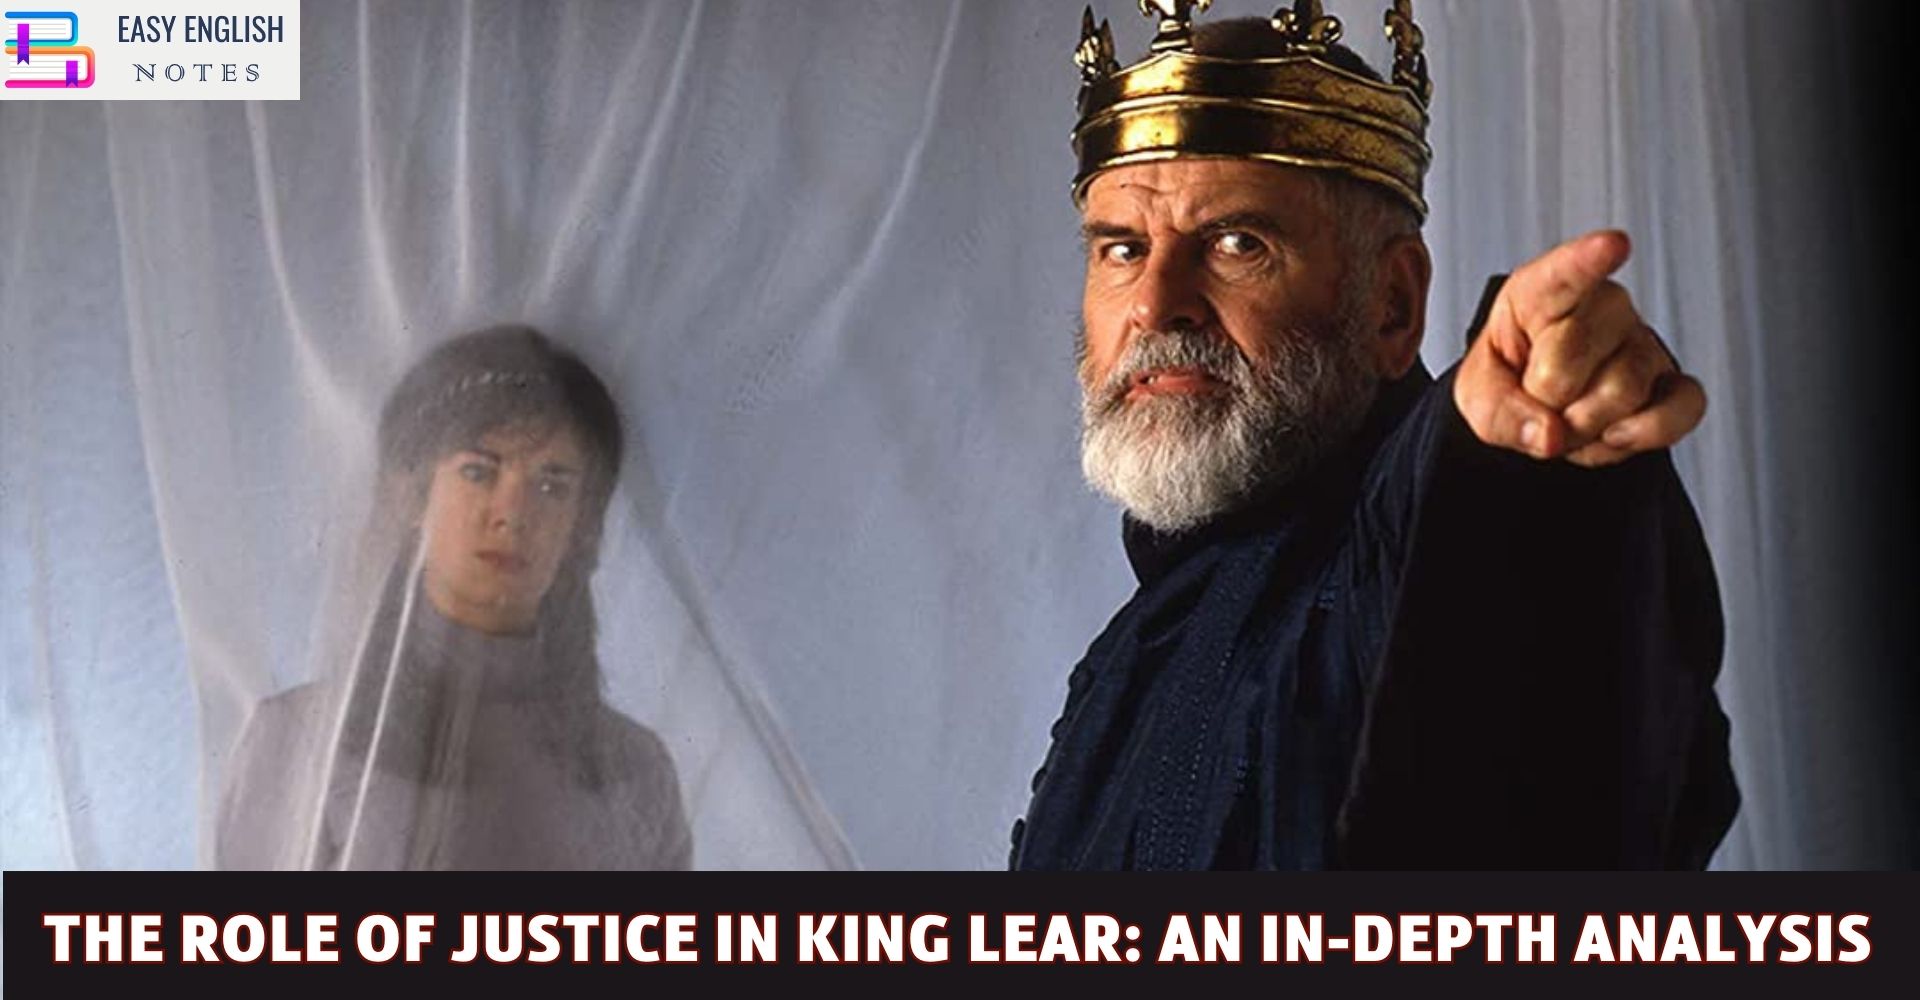 The Role of Justice in King Lear: An In-Depth Analysis